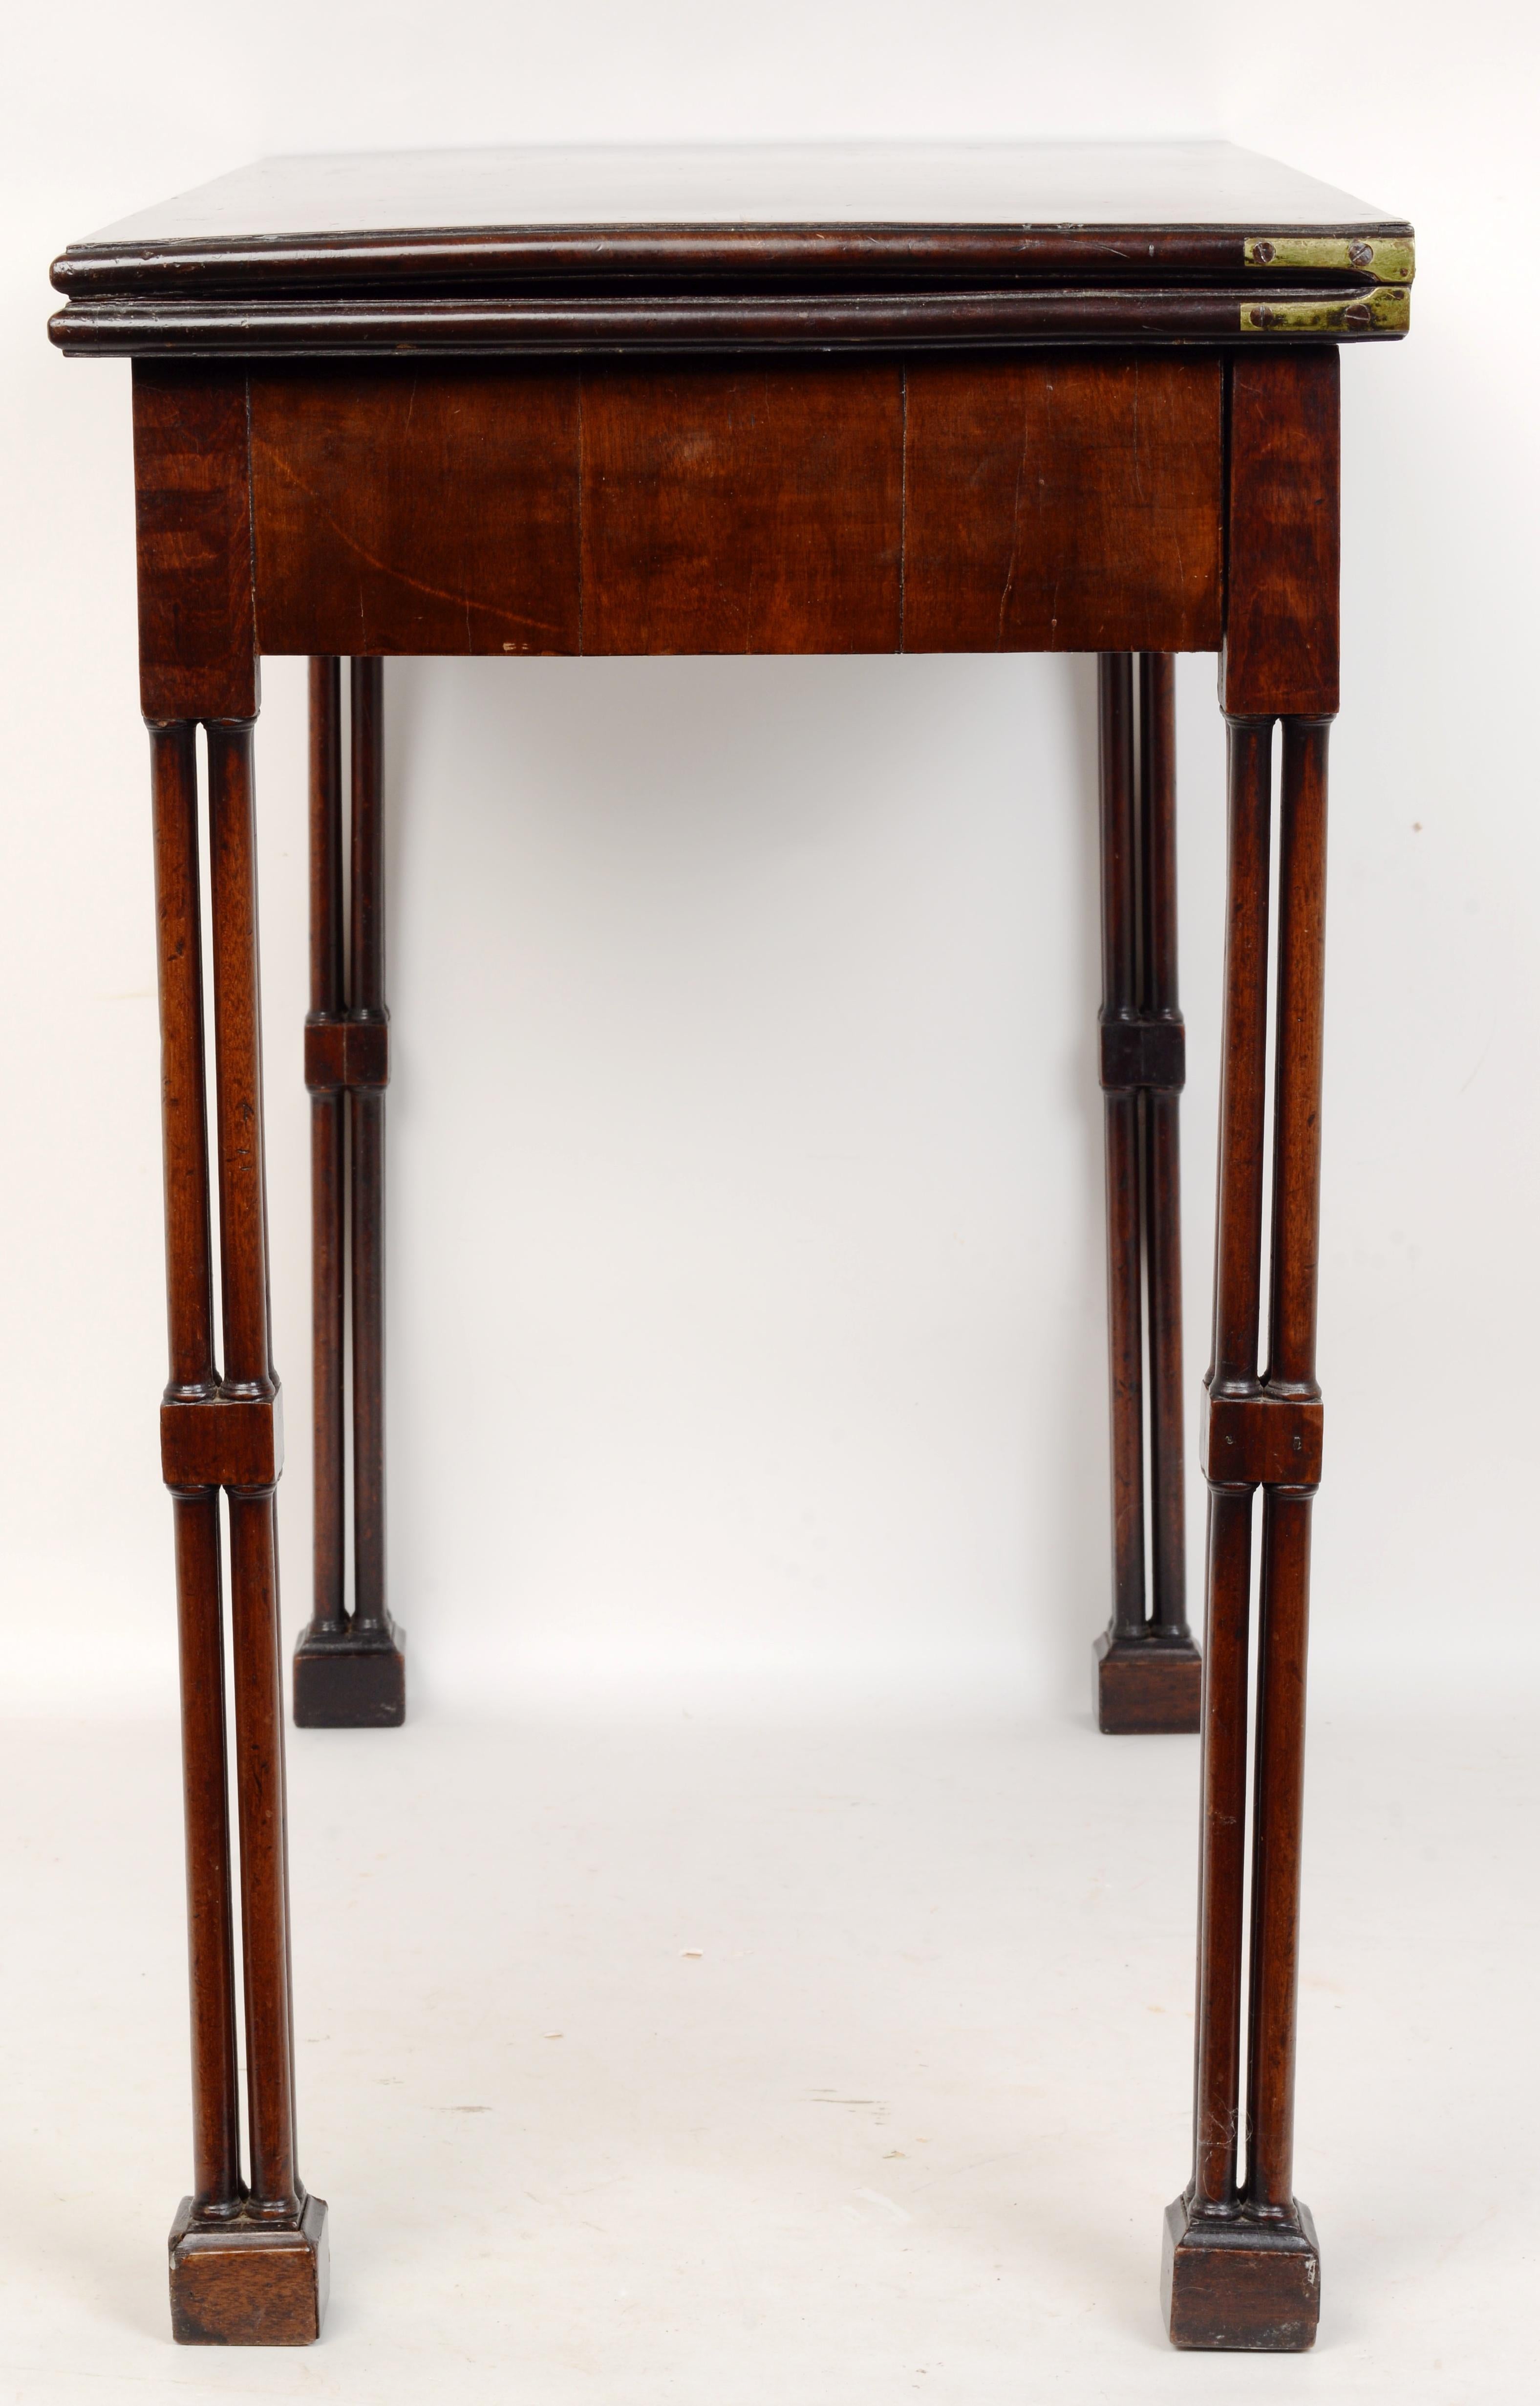 Geo III Mahogany Fold-Over Card Table with Cluster-Leg & Concertina Action c1780 In Good Condition For Sale In valatie, NY